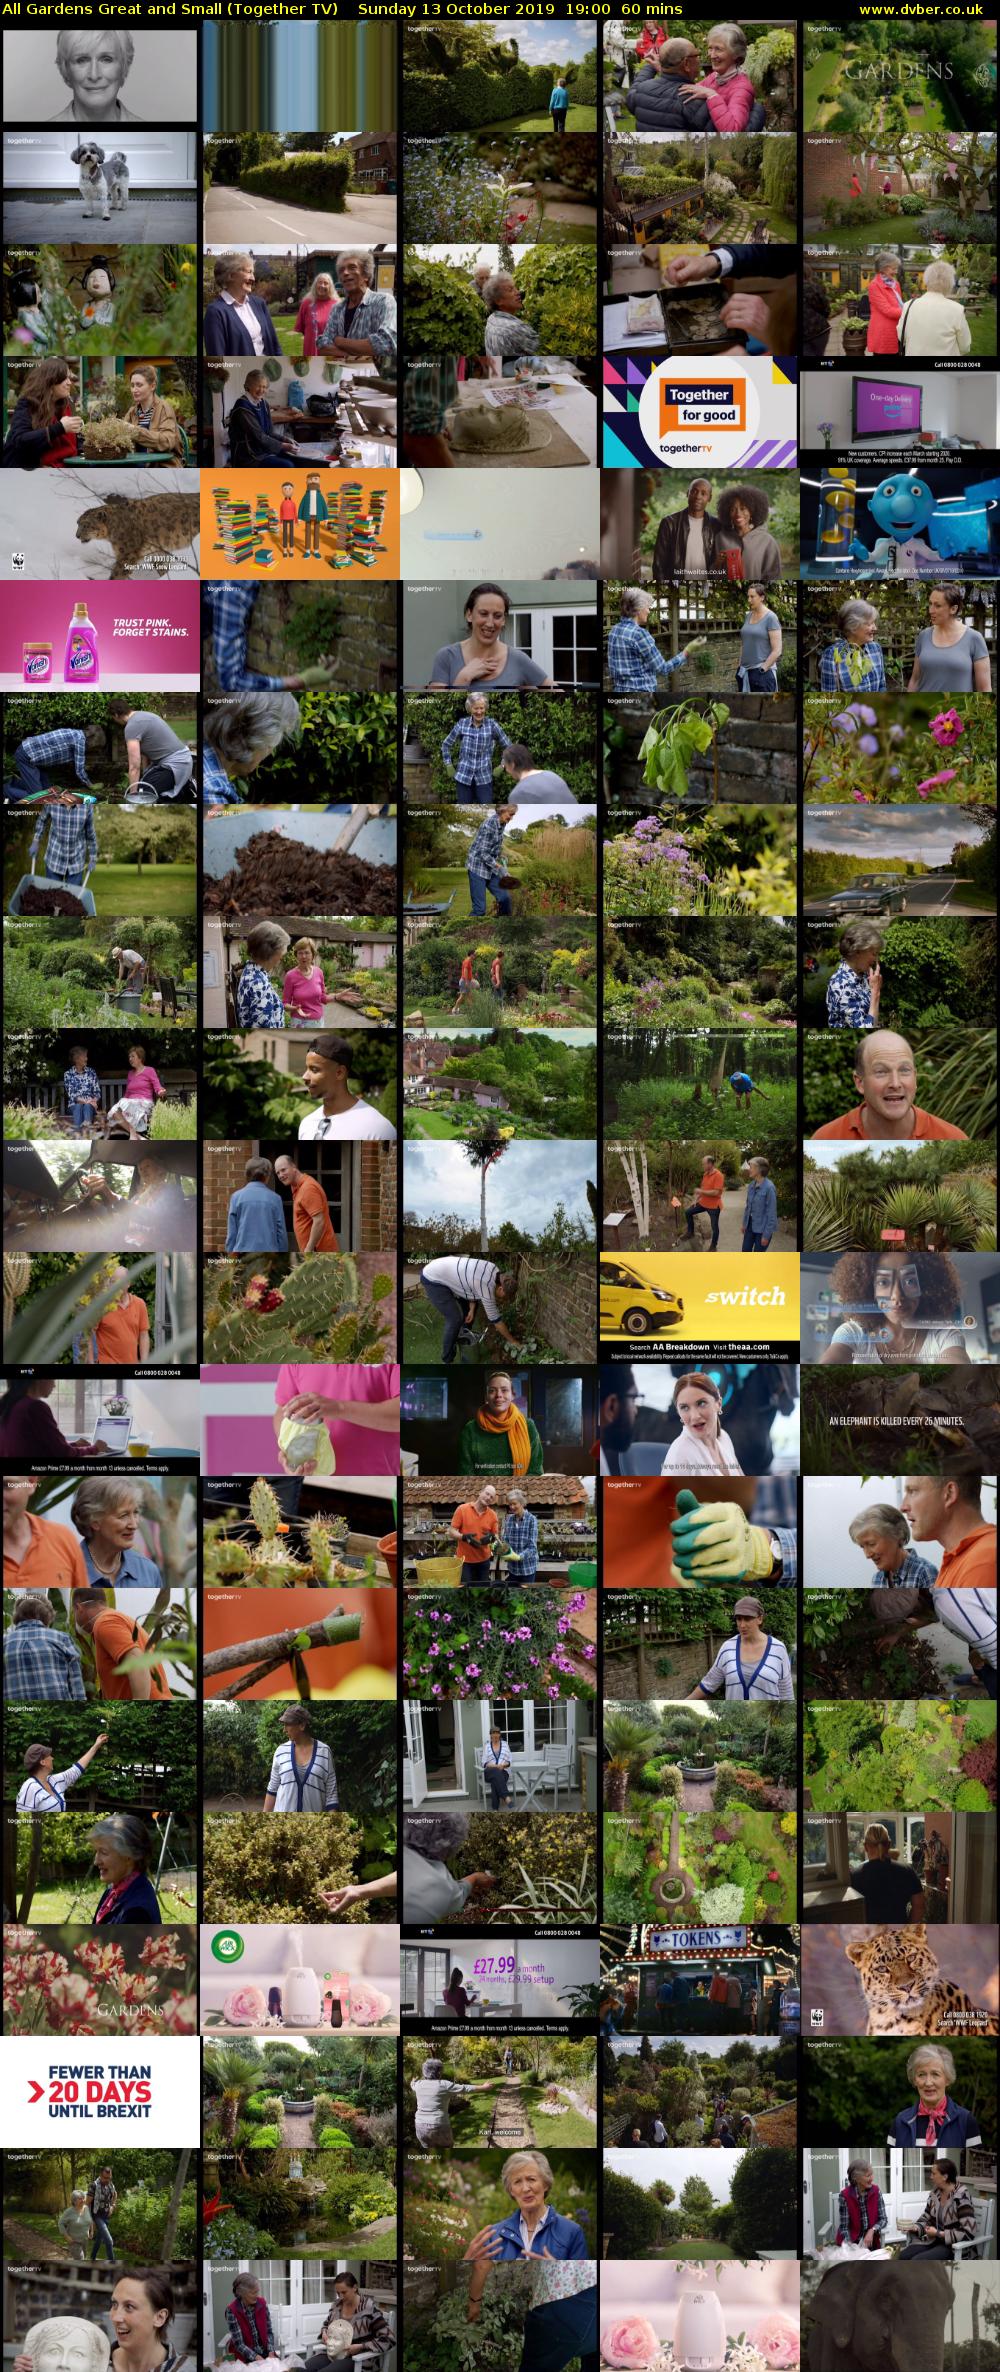 All Gardens Great and Small (Together TV) Sunday 13 October 2019 19:00 - 20:00